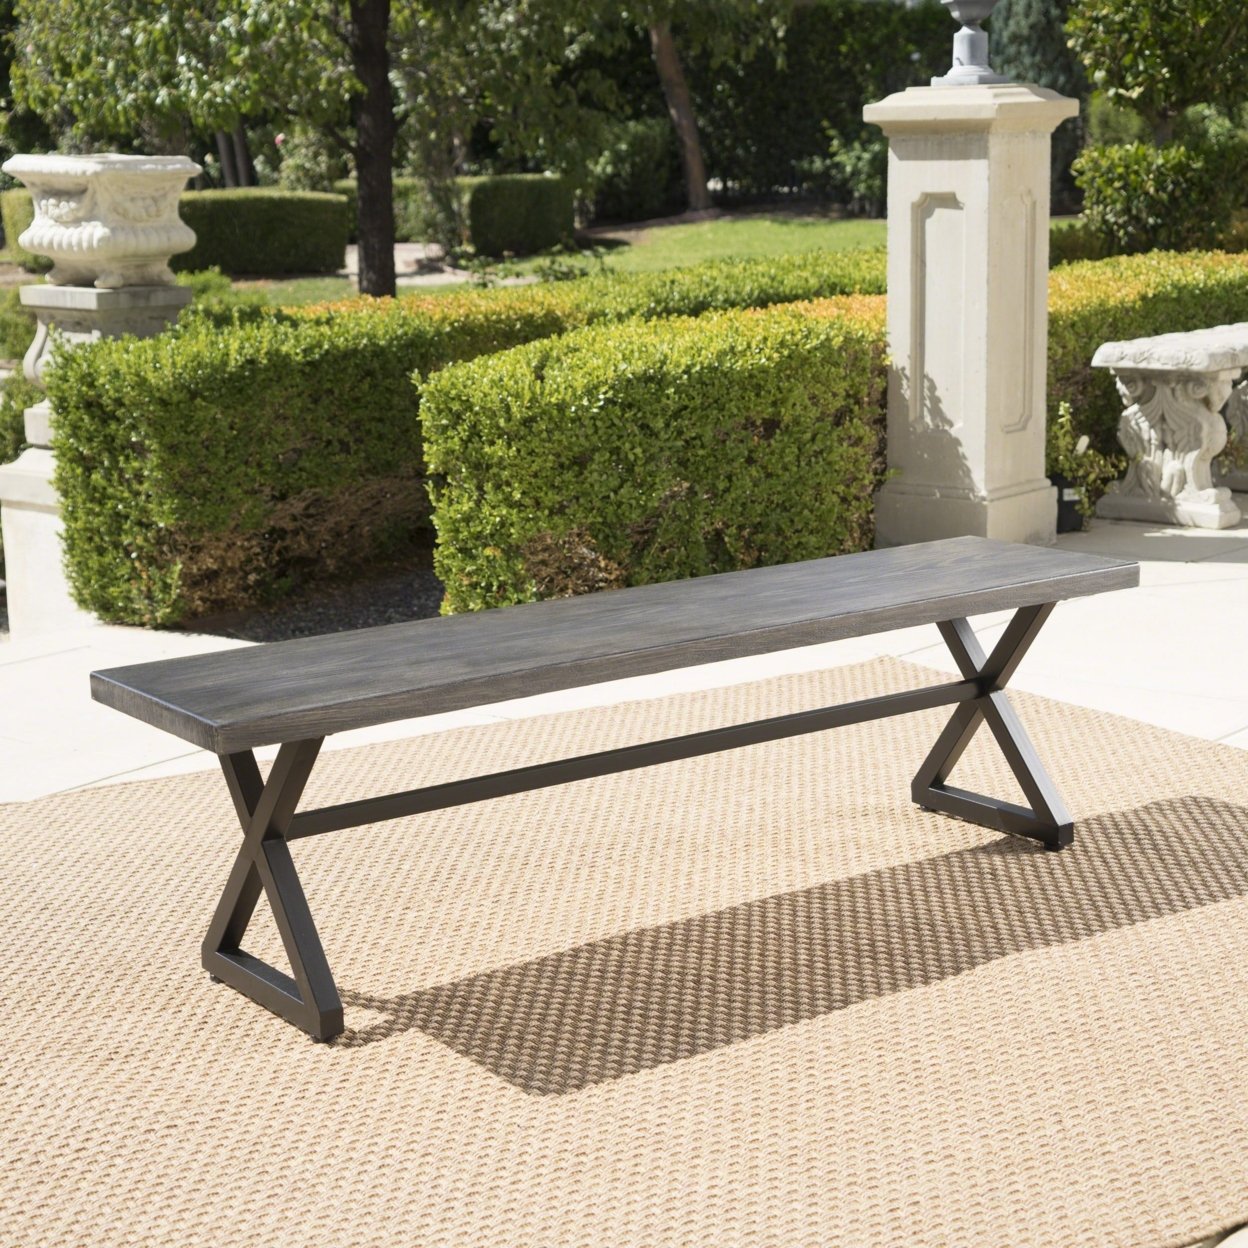 Rosarito Outdoor Aluminum Dining Bench With Black Steel Frame - Brown